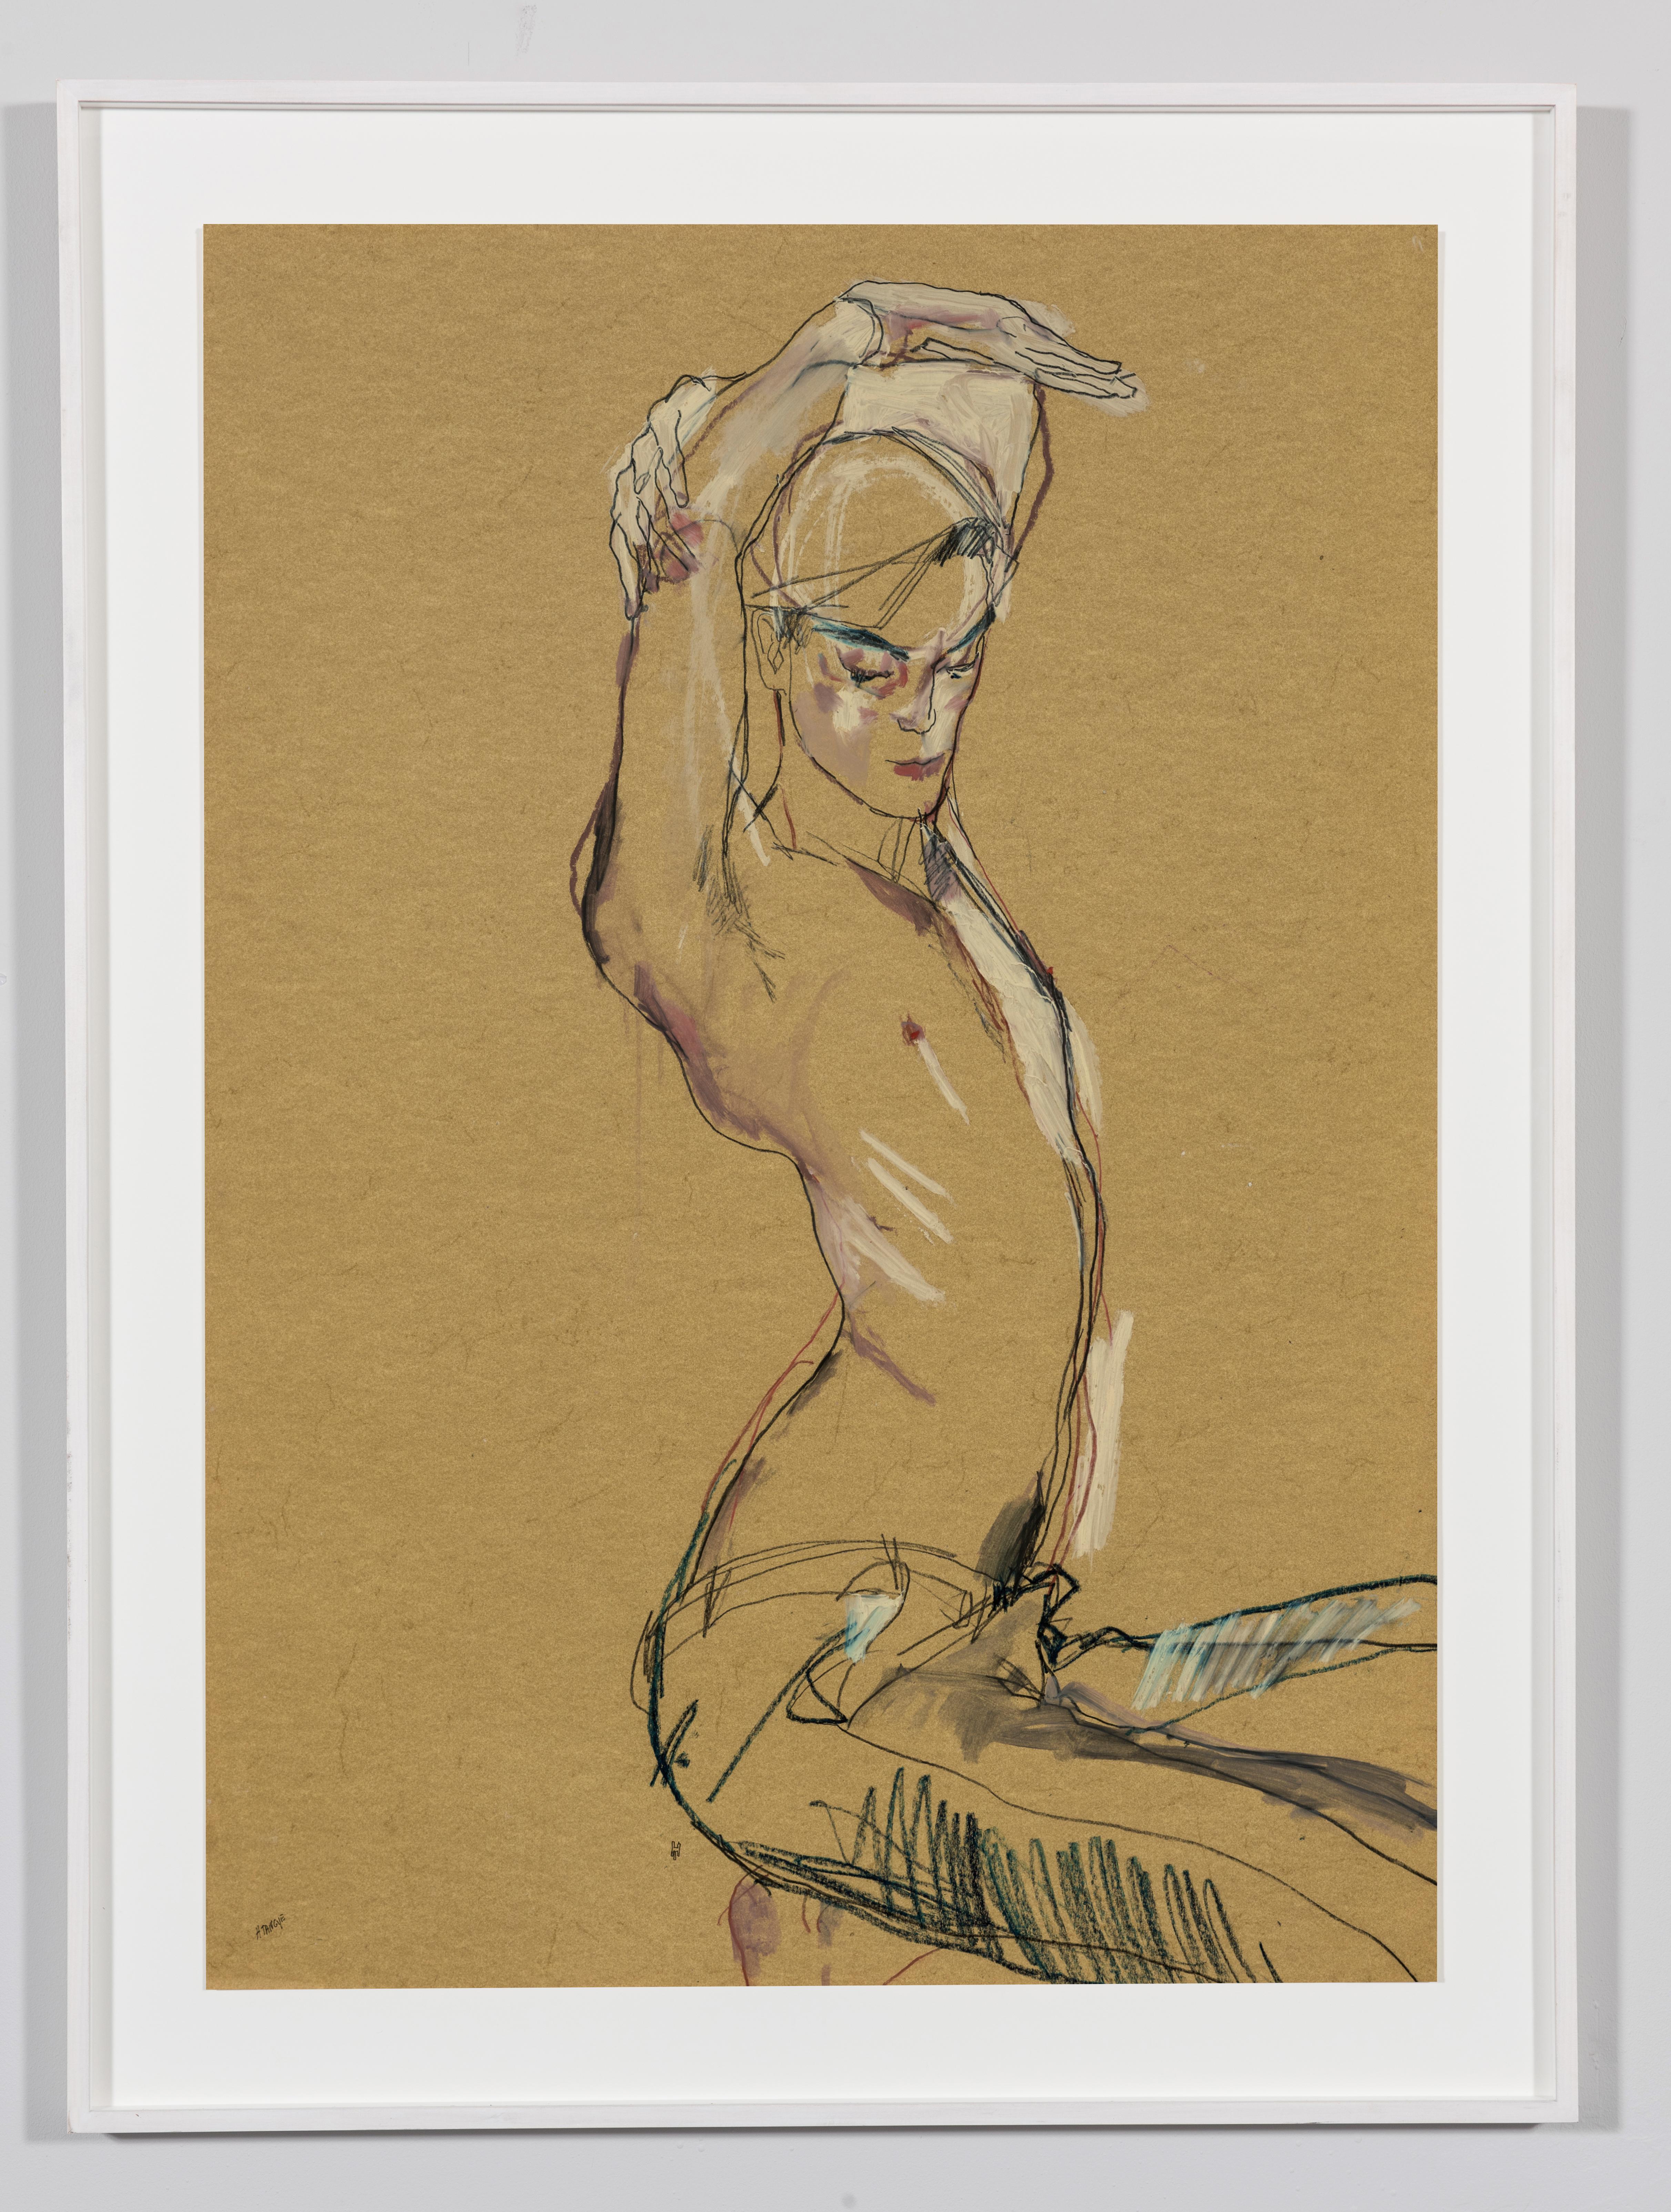 Jake W. (Hands Over Head - Shirtless), Mixed media on ochre parchment - Painting by Howard Tangye